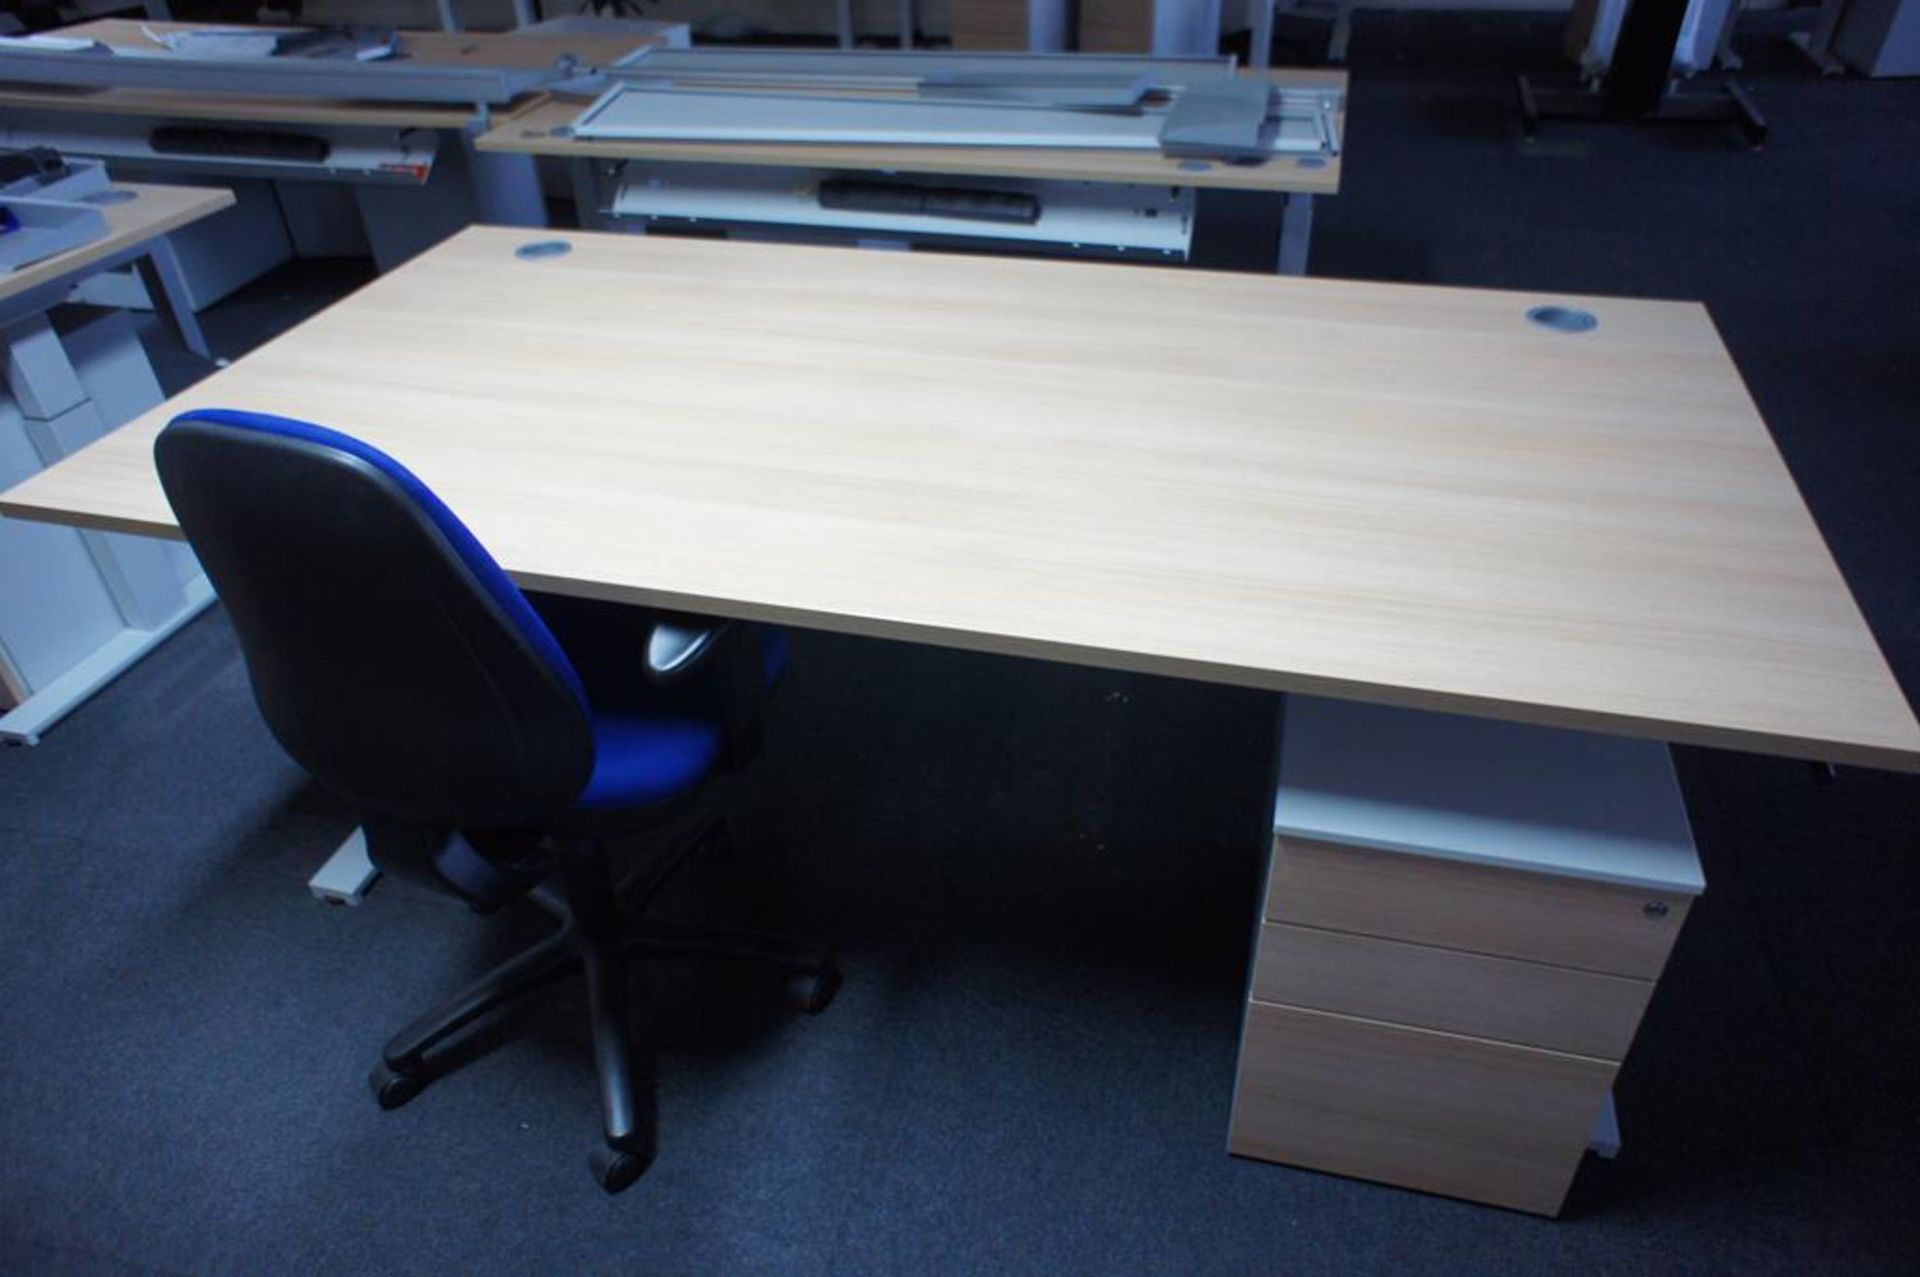 * Oak Effect Compiler Desk 2000 x 1000 with Rise & Fall adjustment with matching pedestal & - Image 2 of 3